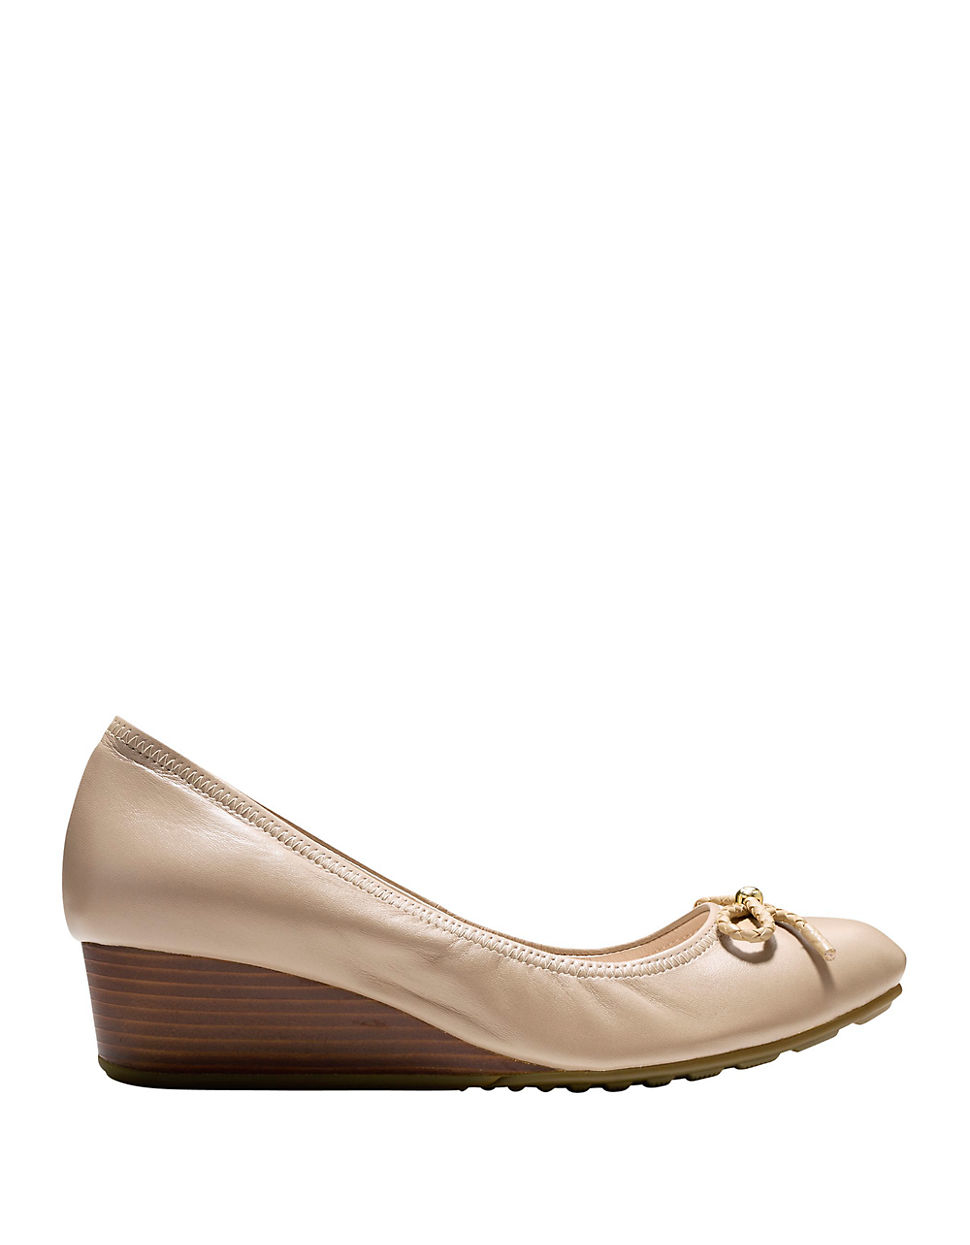 Cole haan Tali Leather Ballet Wedges in Natural | Lyst